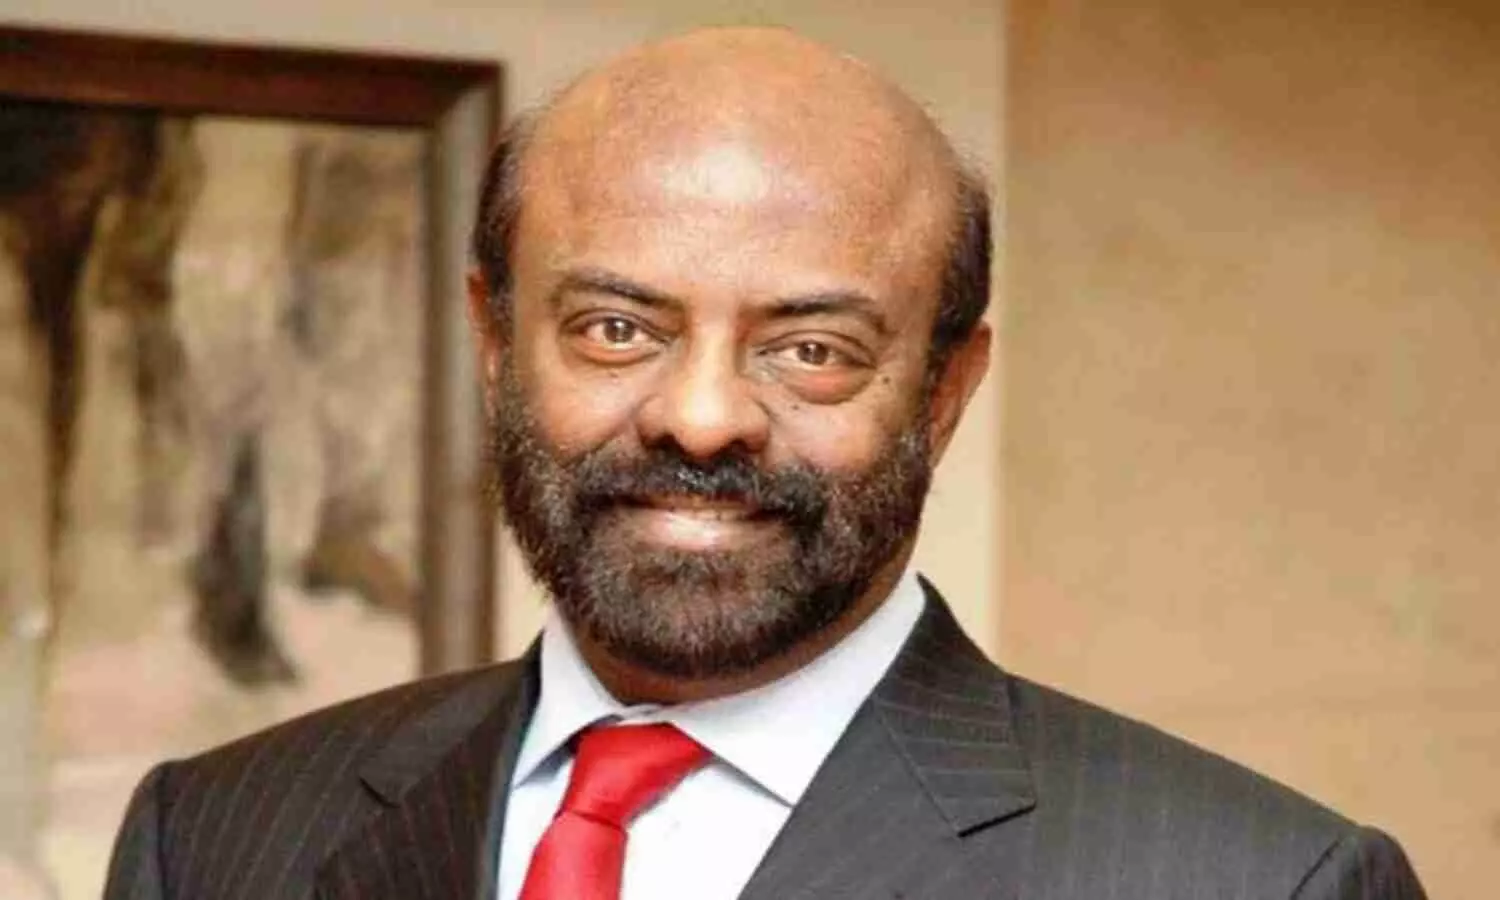 Chairperson of HCL Shiv Nadar